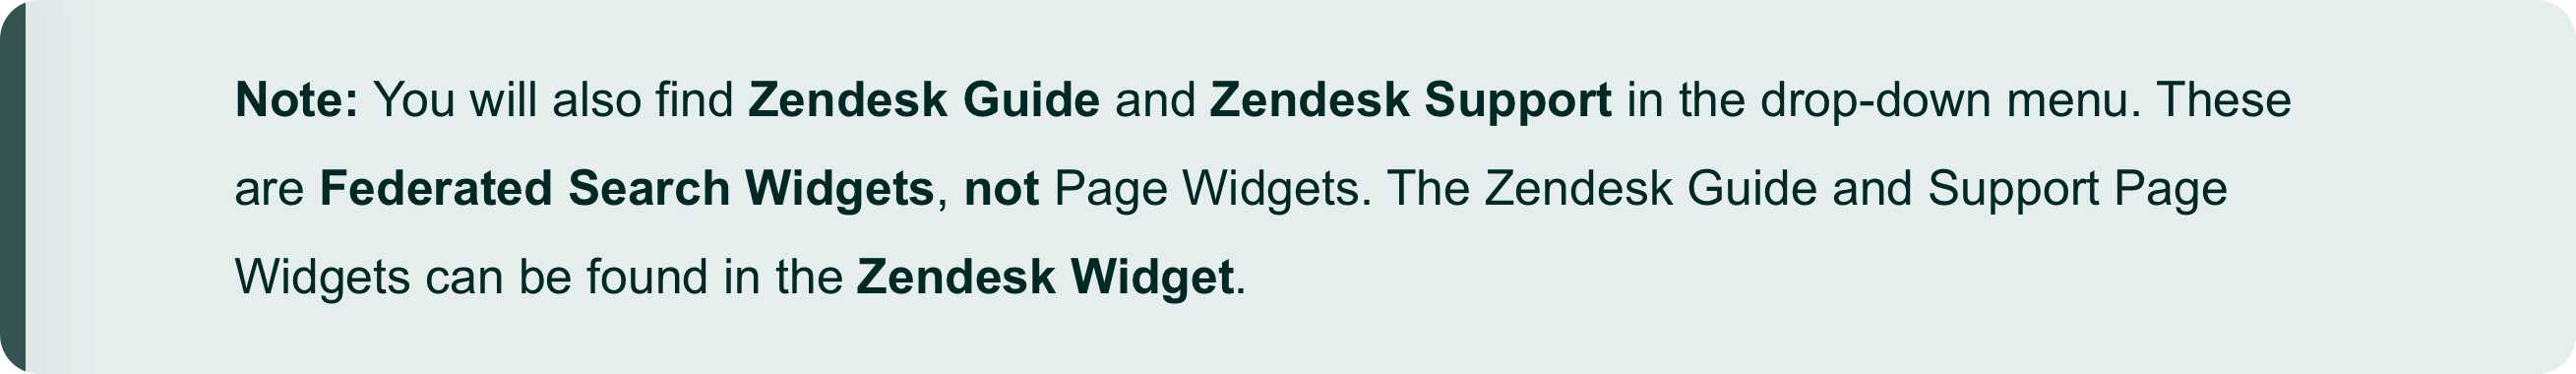 Zendesk_Guide_and_Support_on_Pages_3.png